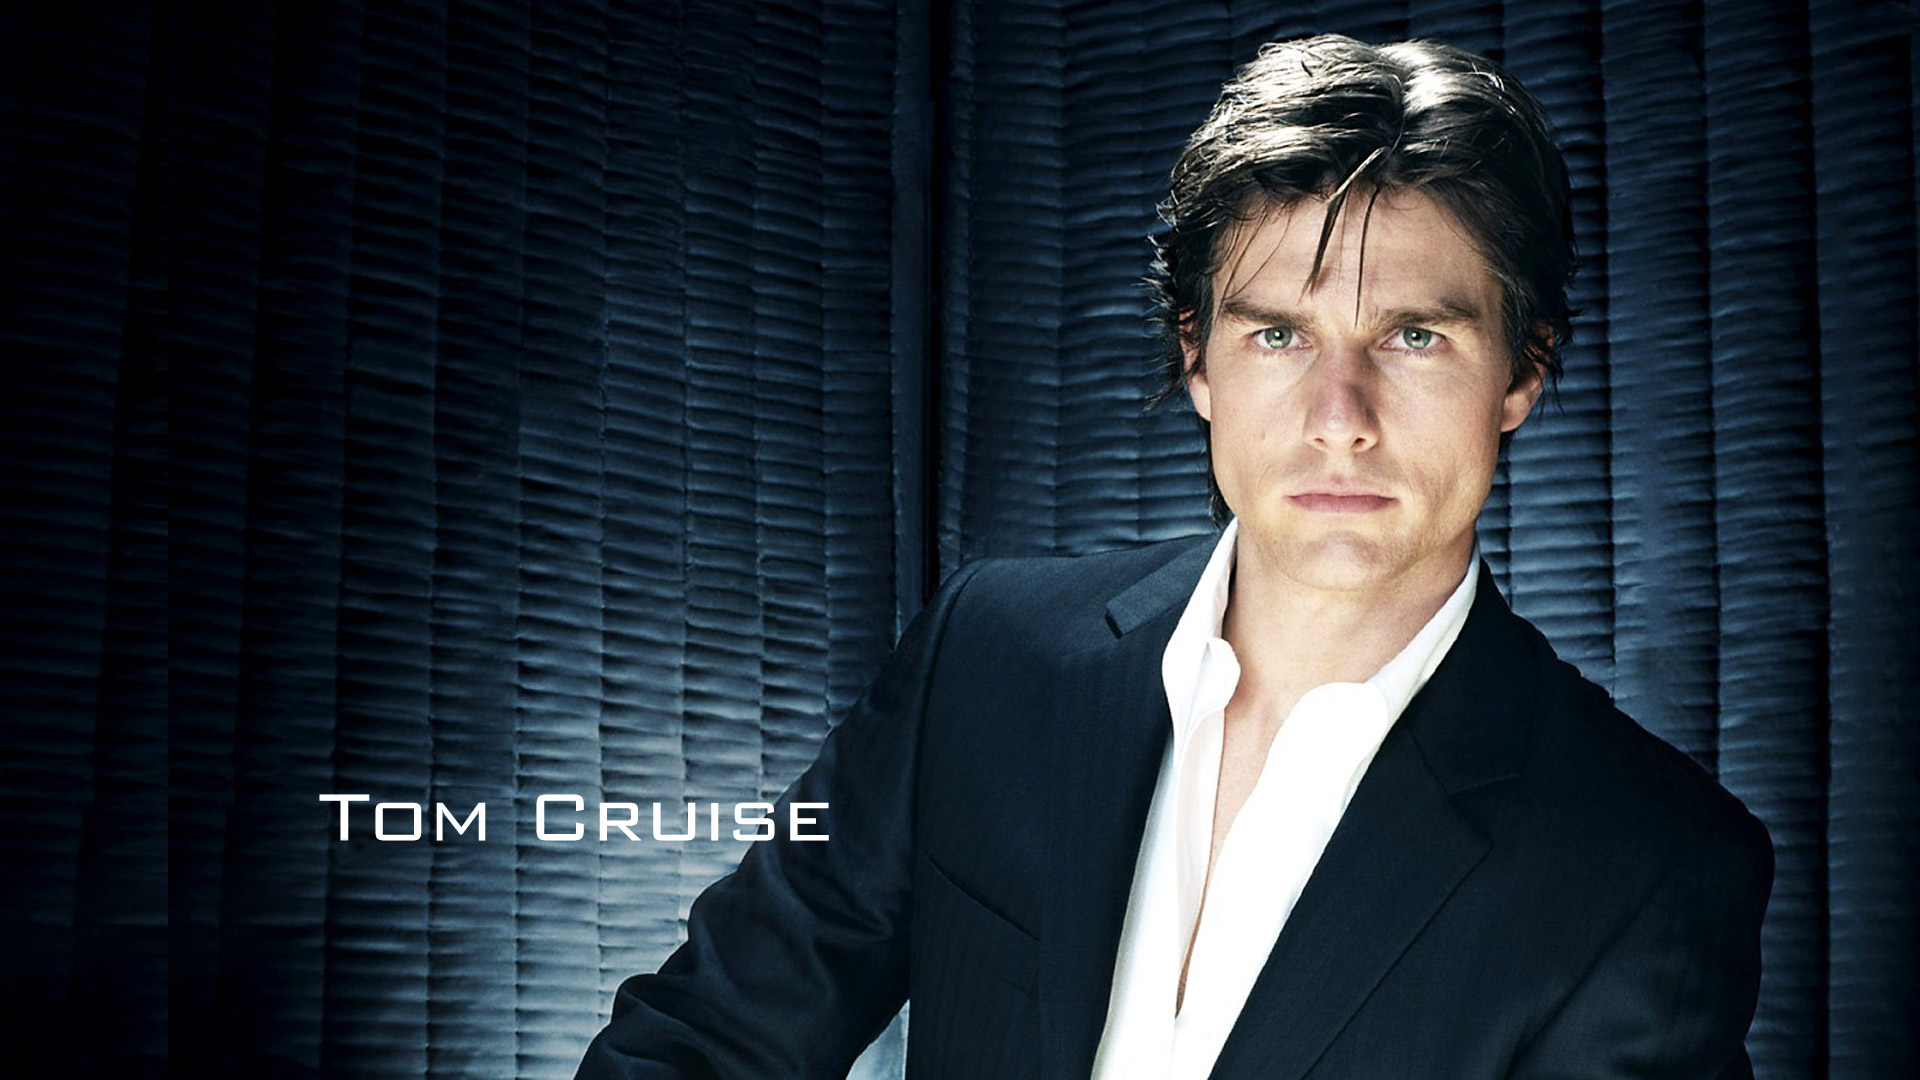 Tom Cruise Wallpapers High Resolution and Quality